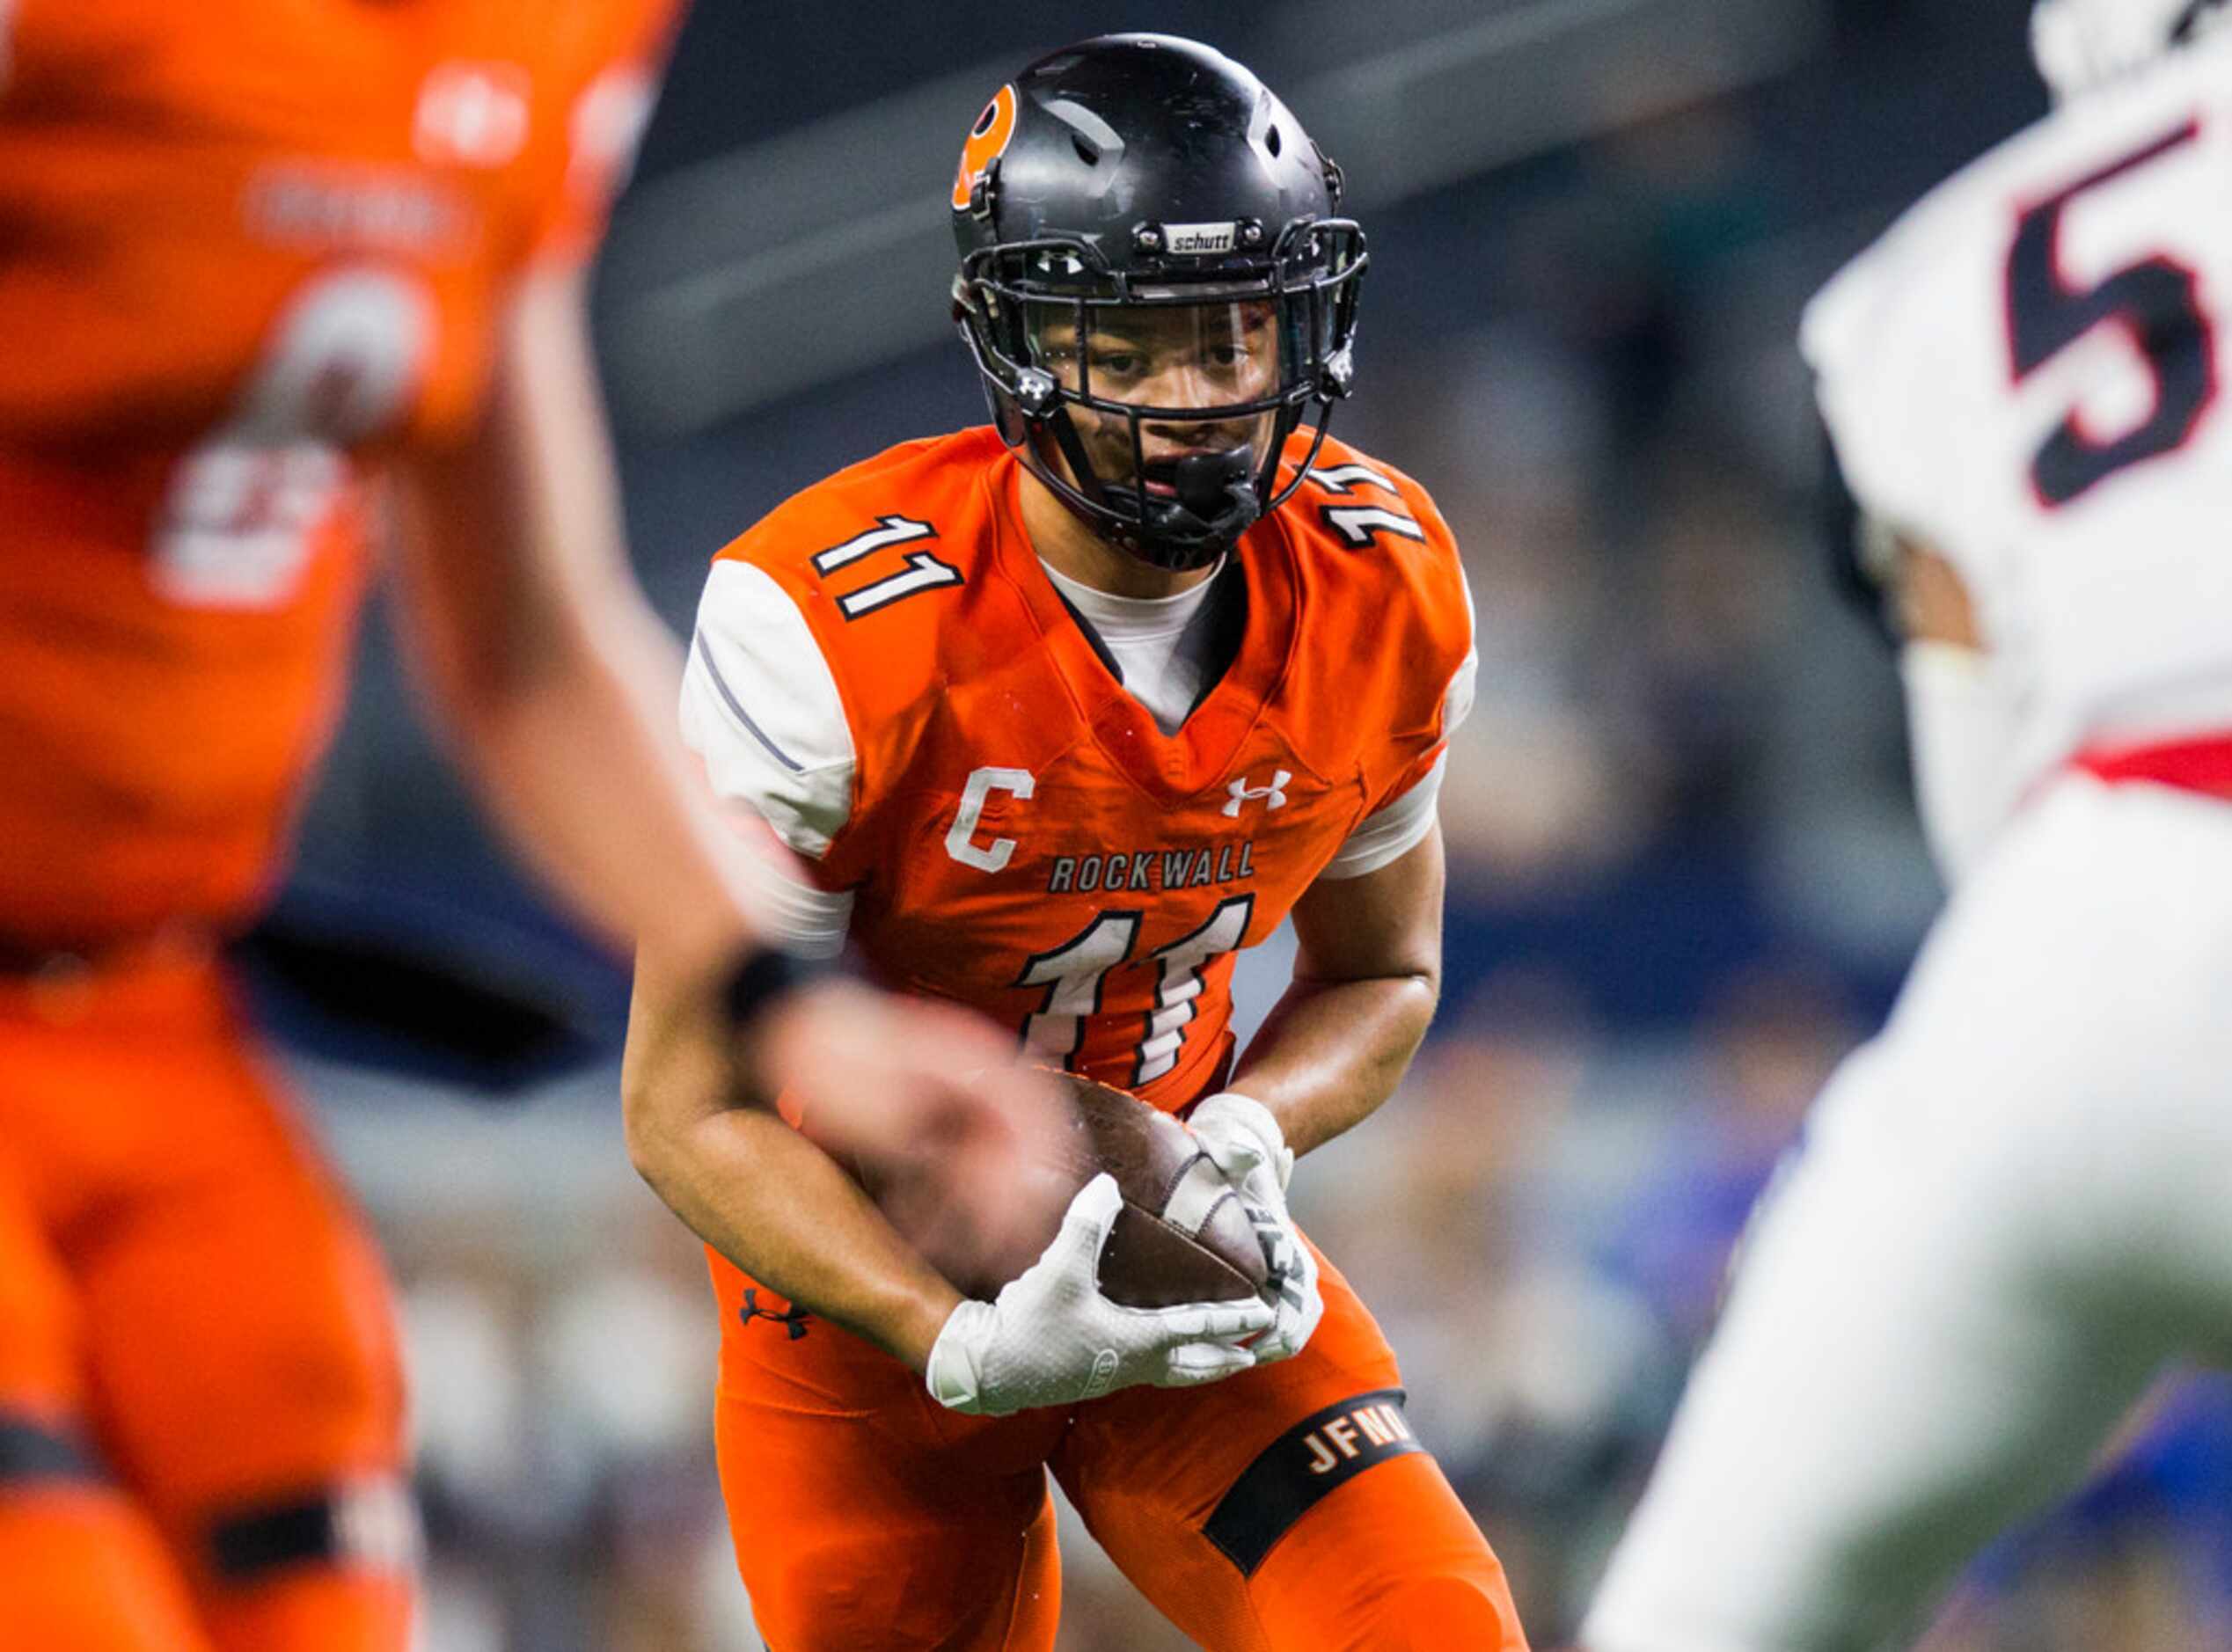 Rockwall wide receiver Jaxon Smith-Njigba (11) looks for an opening during the third quarter...